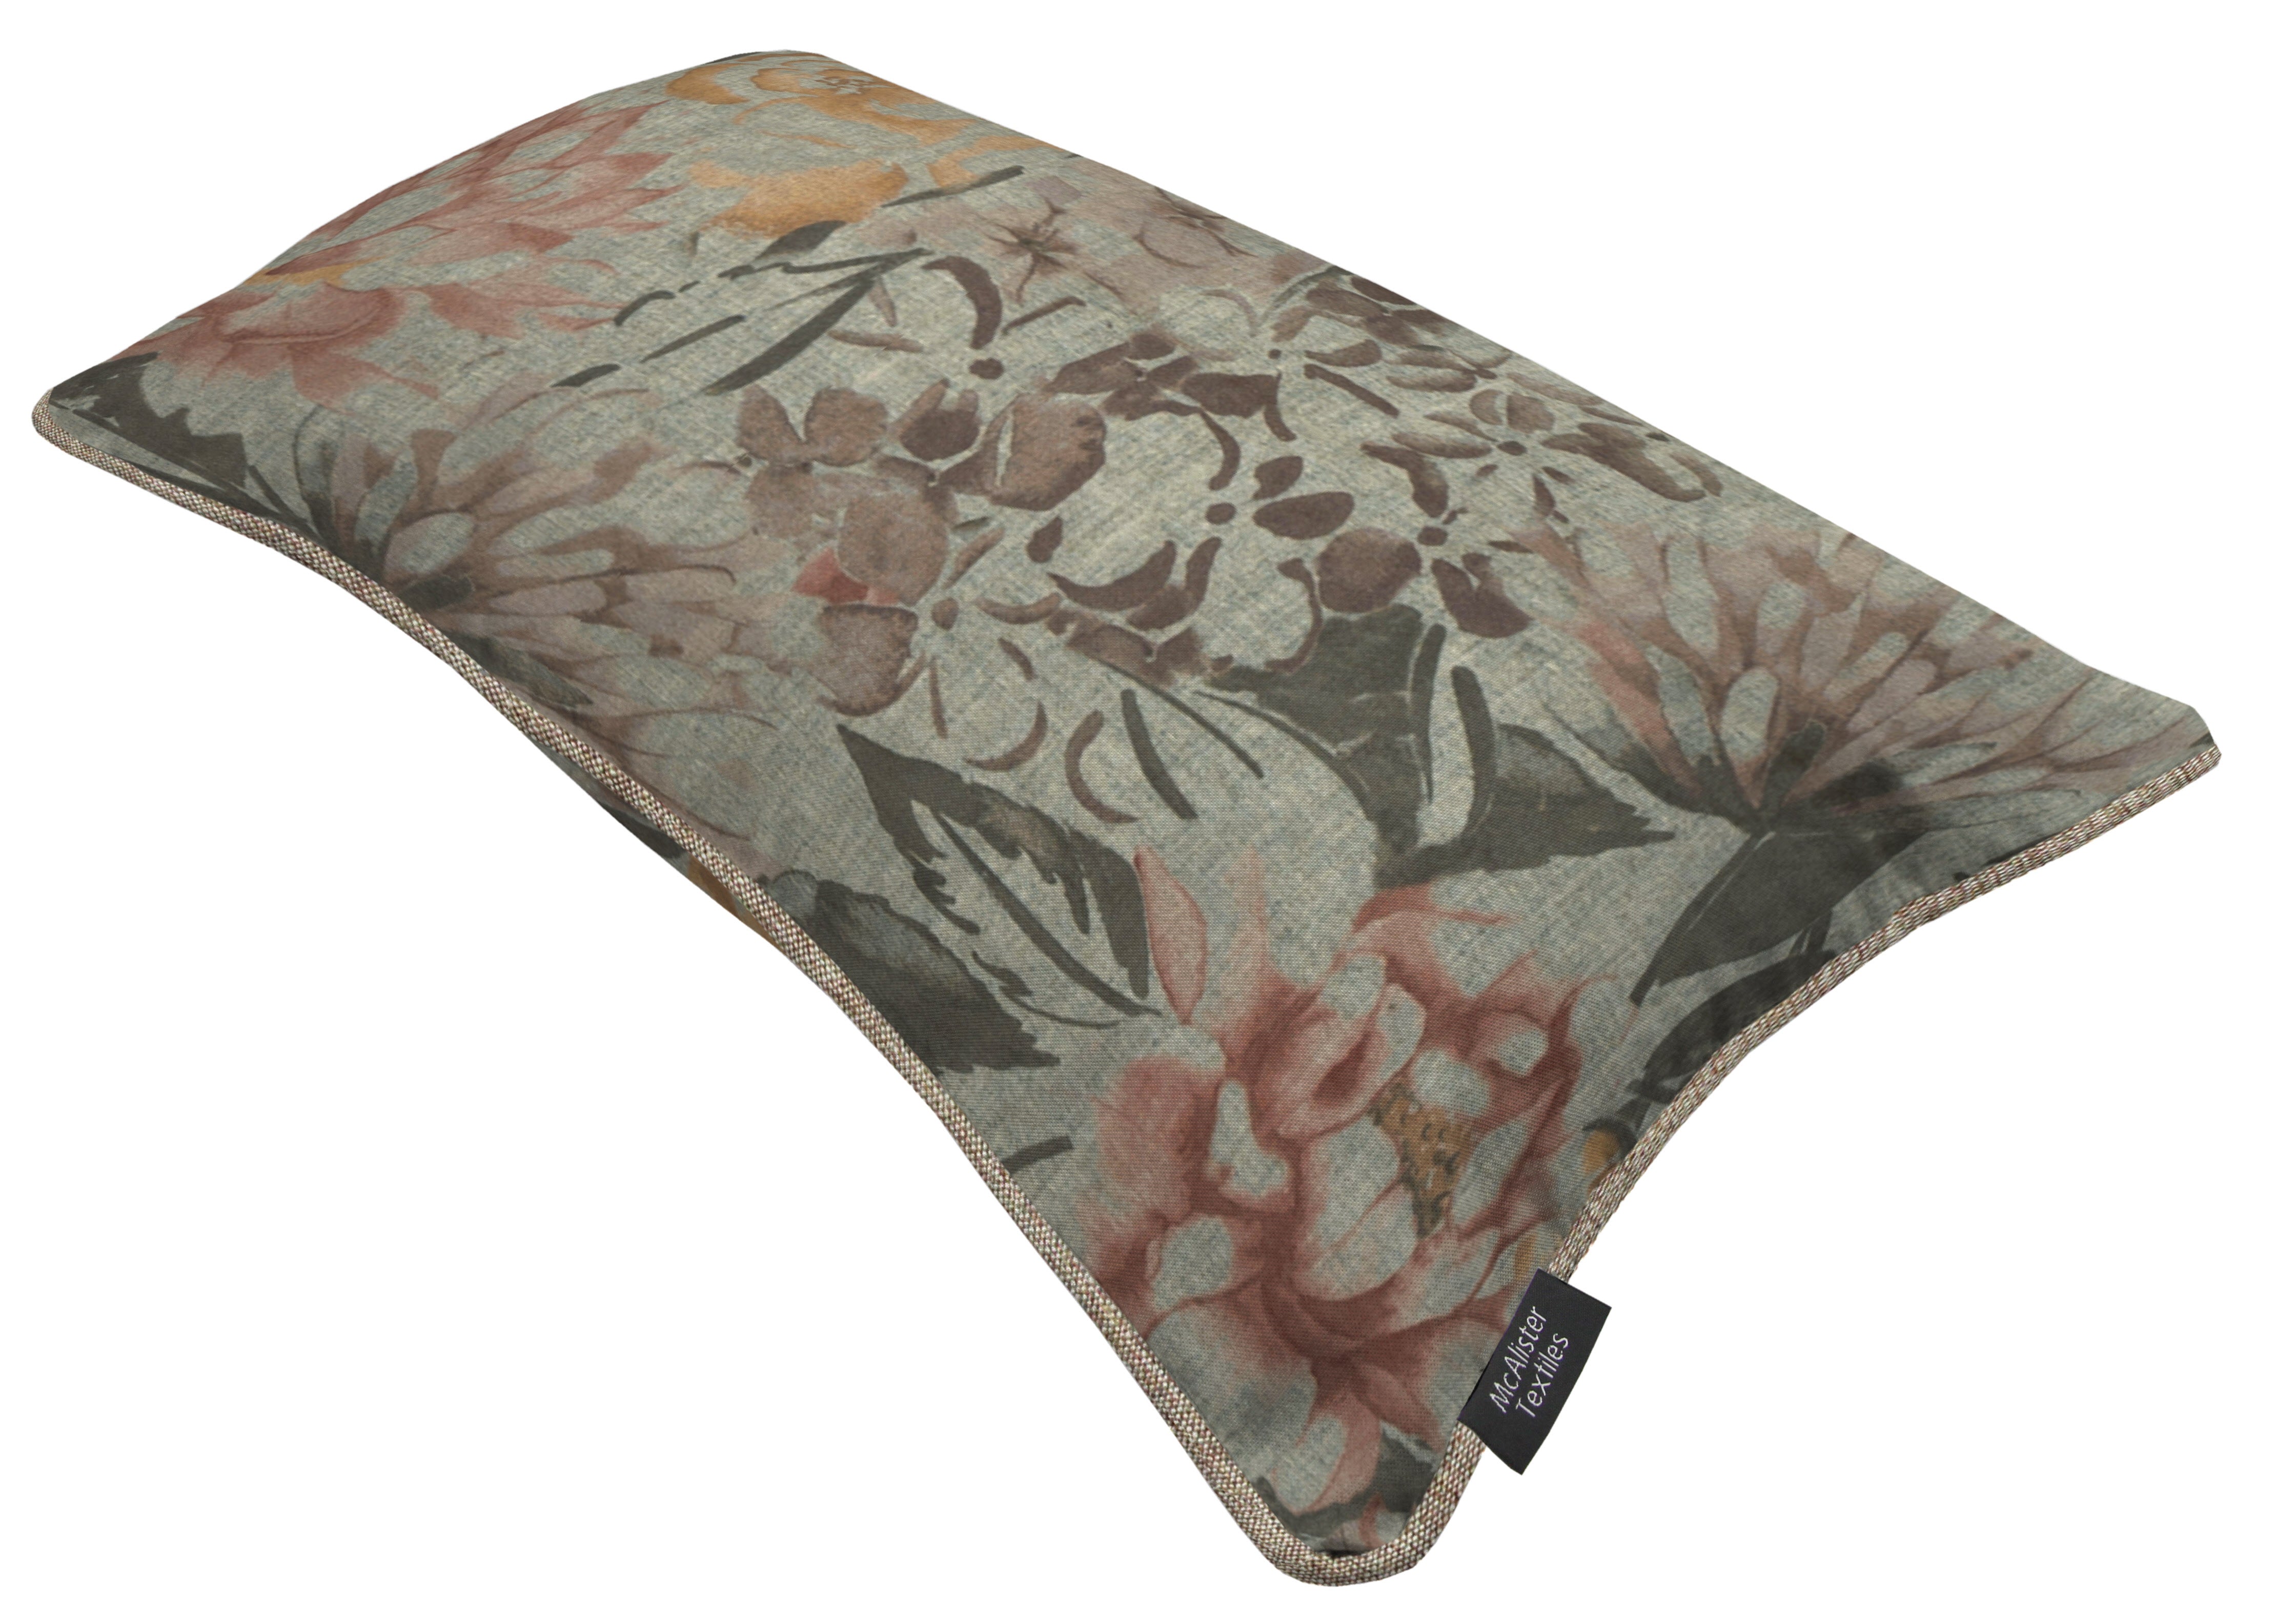 Blooma Green, Pink and Ochre Floral Pillow